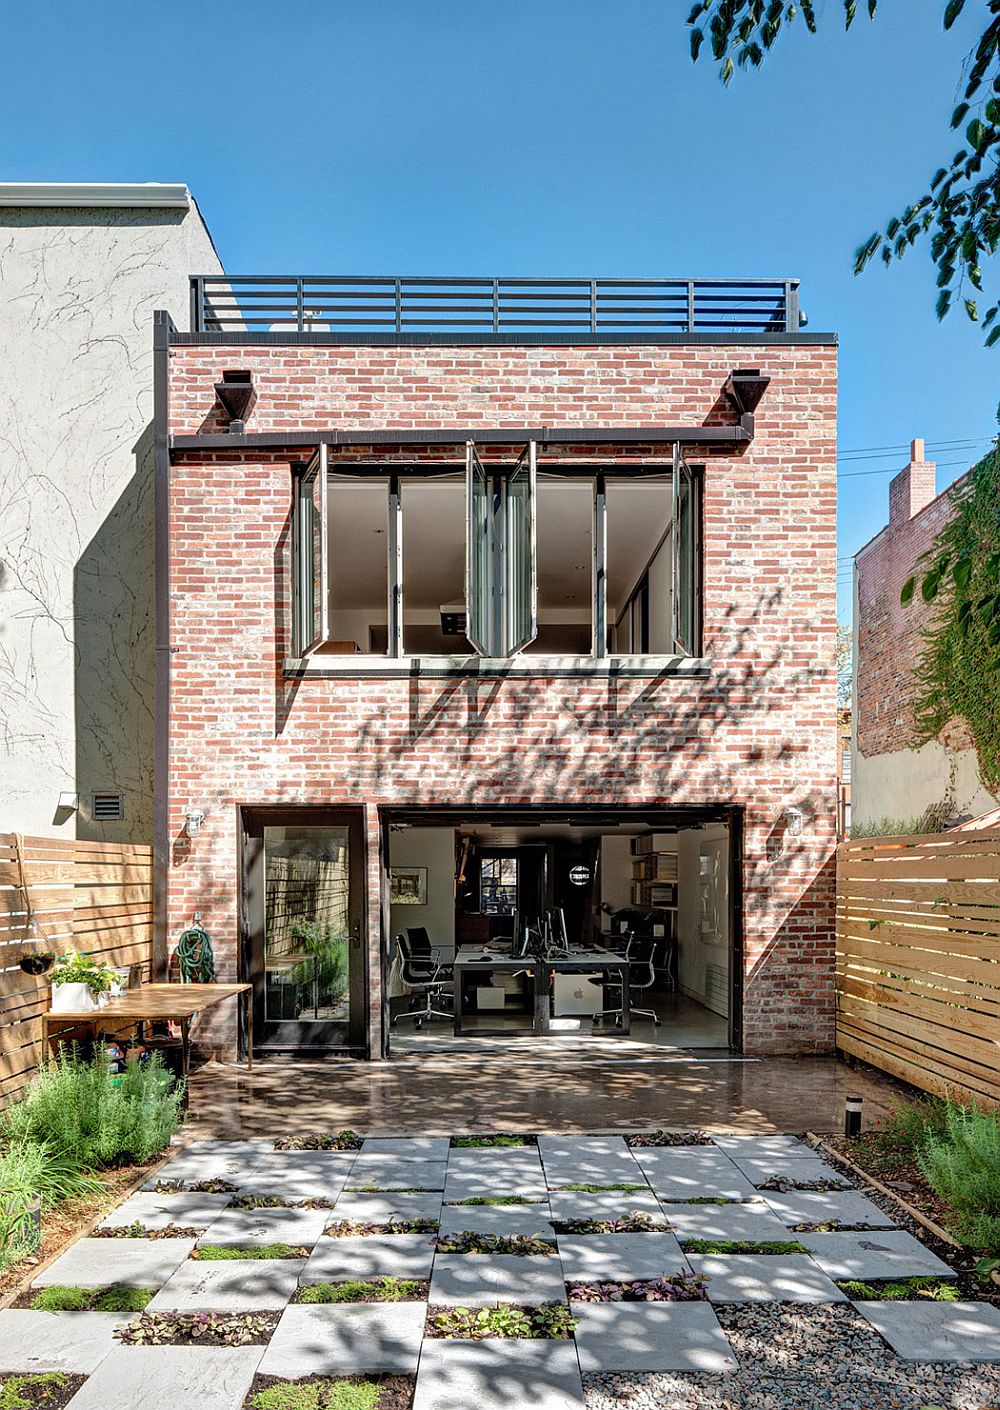 Weathered brick walls of the Brooklyn home gve it a timeless appeal